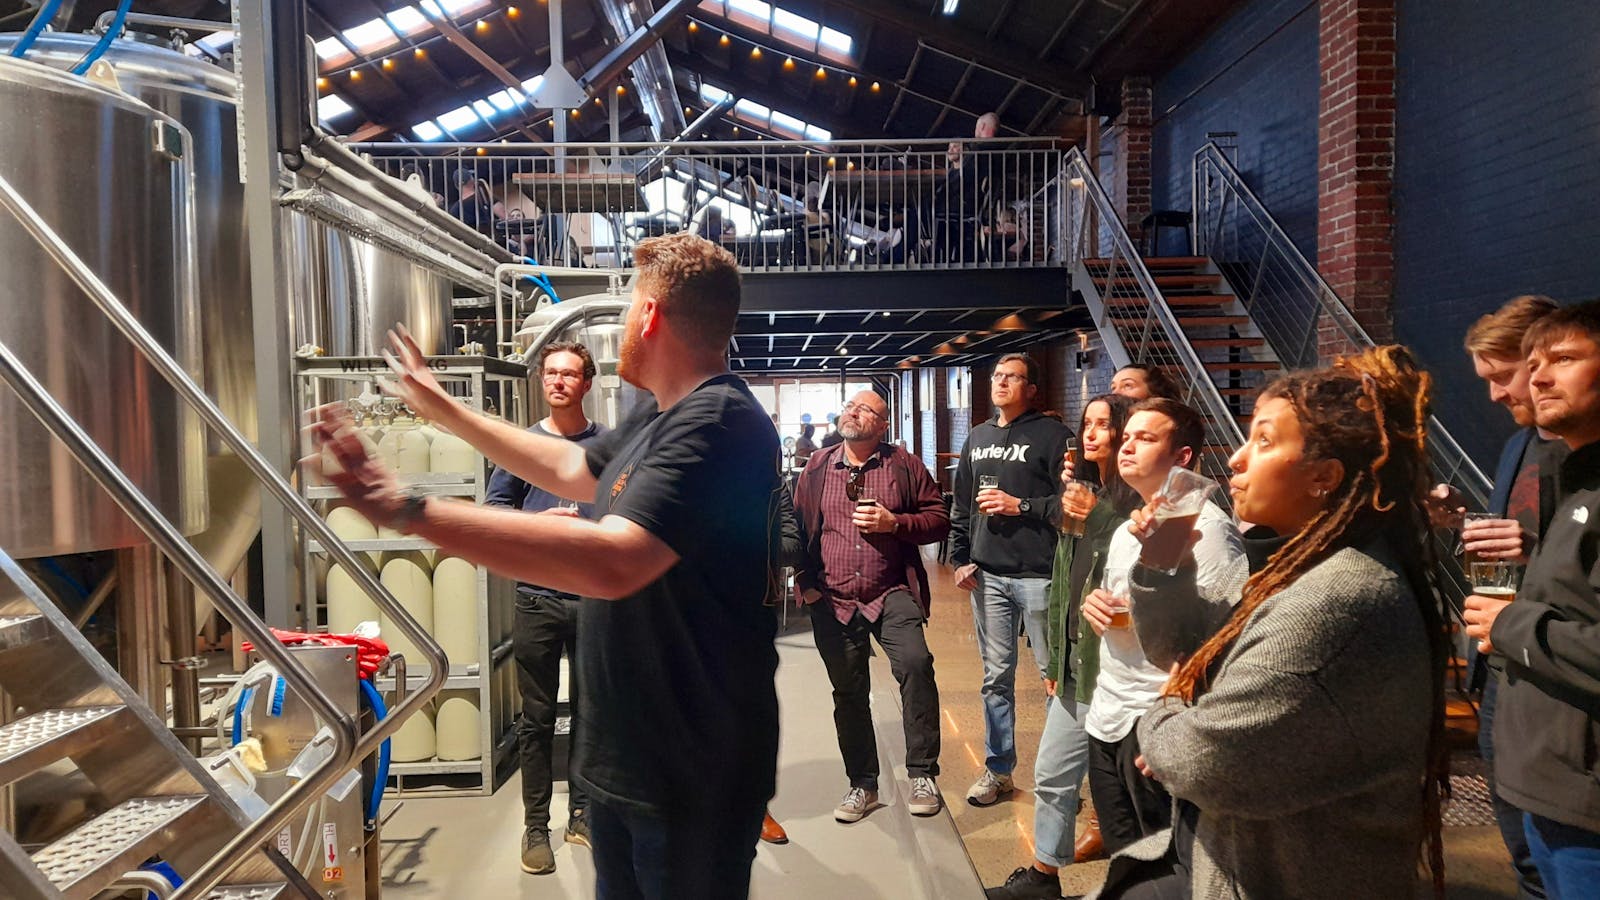 go behind the scenes with a micro brewery tour